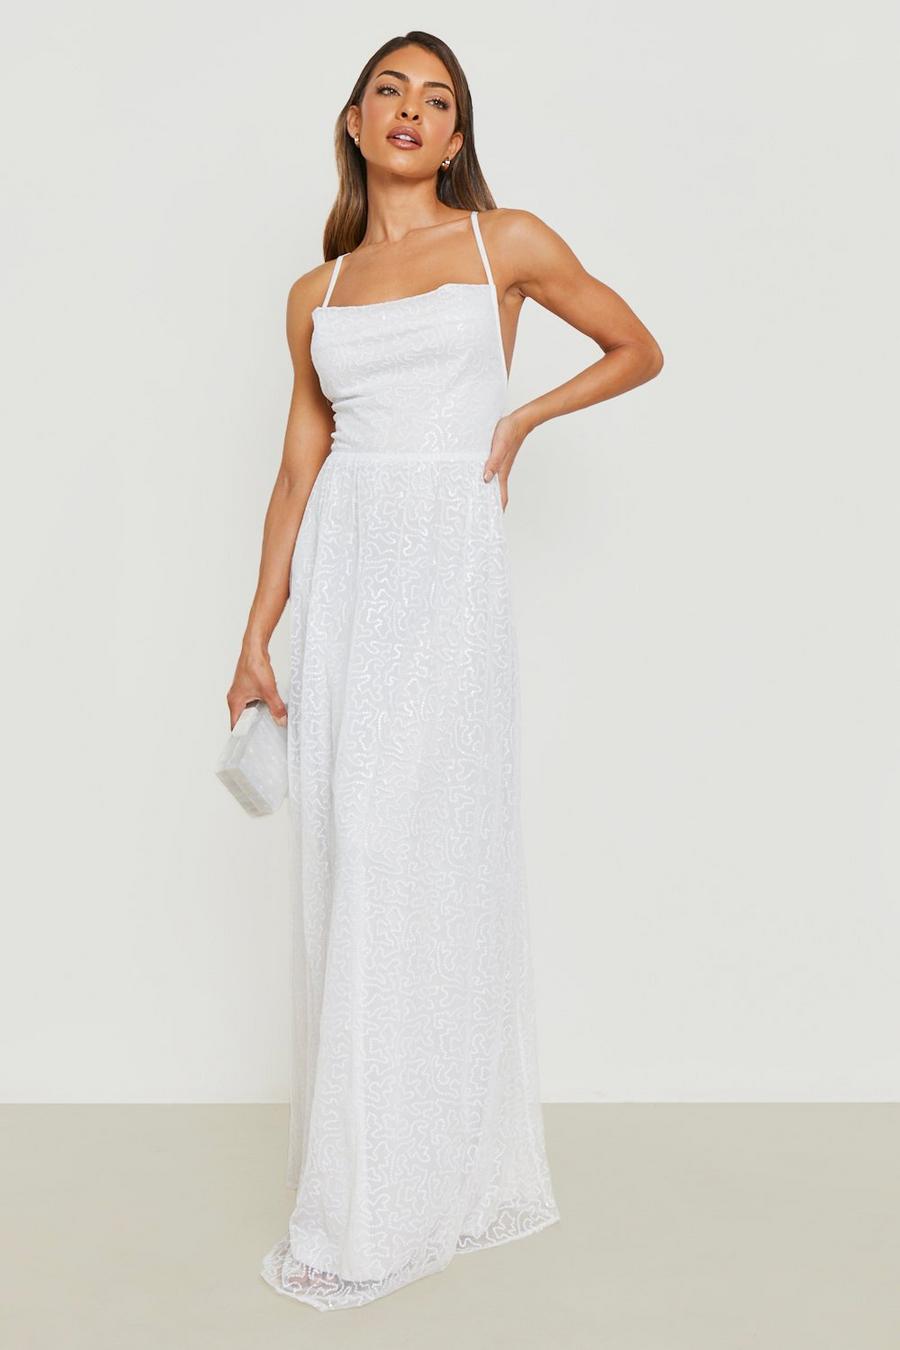 Ivory white Sequin Cowl Strappy Maxi Dress